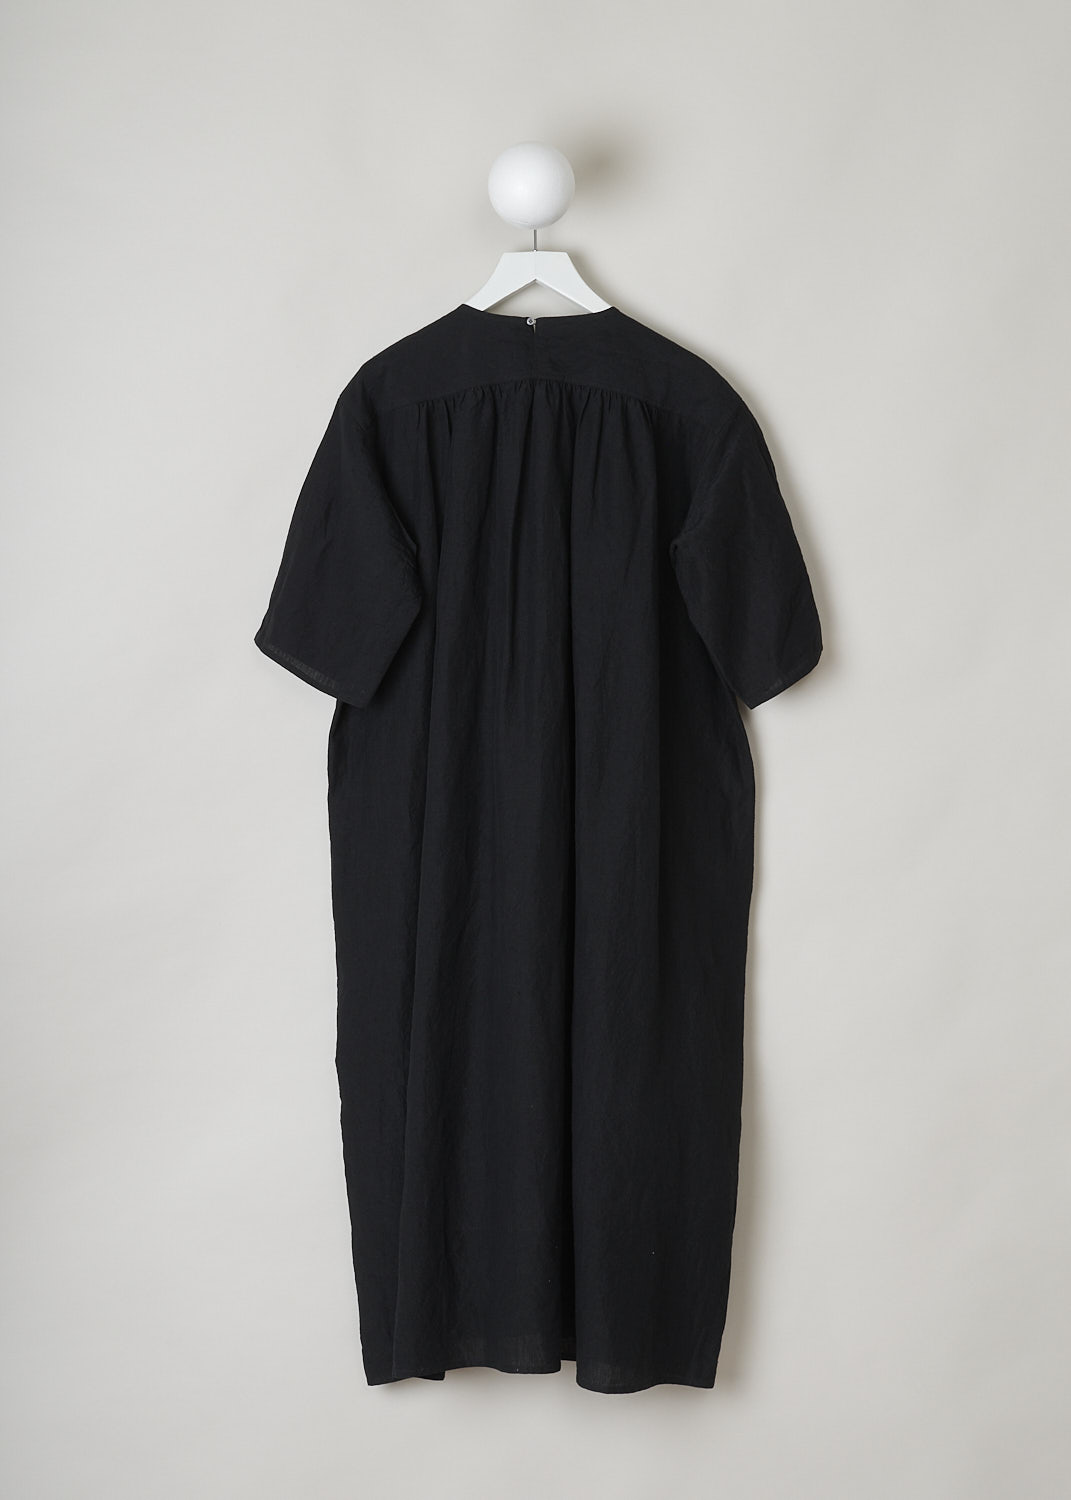 SOFIE Dâ€™HOORE, BLACK LINEN DARNELLE DRESS, DARNELLE_LIFE_BLACK, Black, Back, This oversized black midi dress features a round neckline, dropped shoulders and short sleeves. The A-line dress has a square bib-like front with pleated details below. Concealed in the side seams, slanted pockets can be found. The dress has a straight hemline with slits on either side. 

